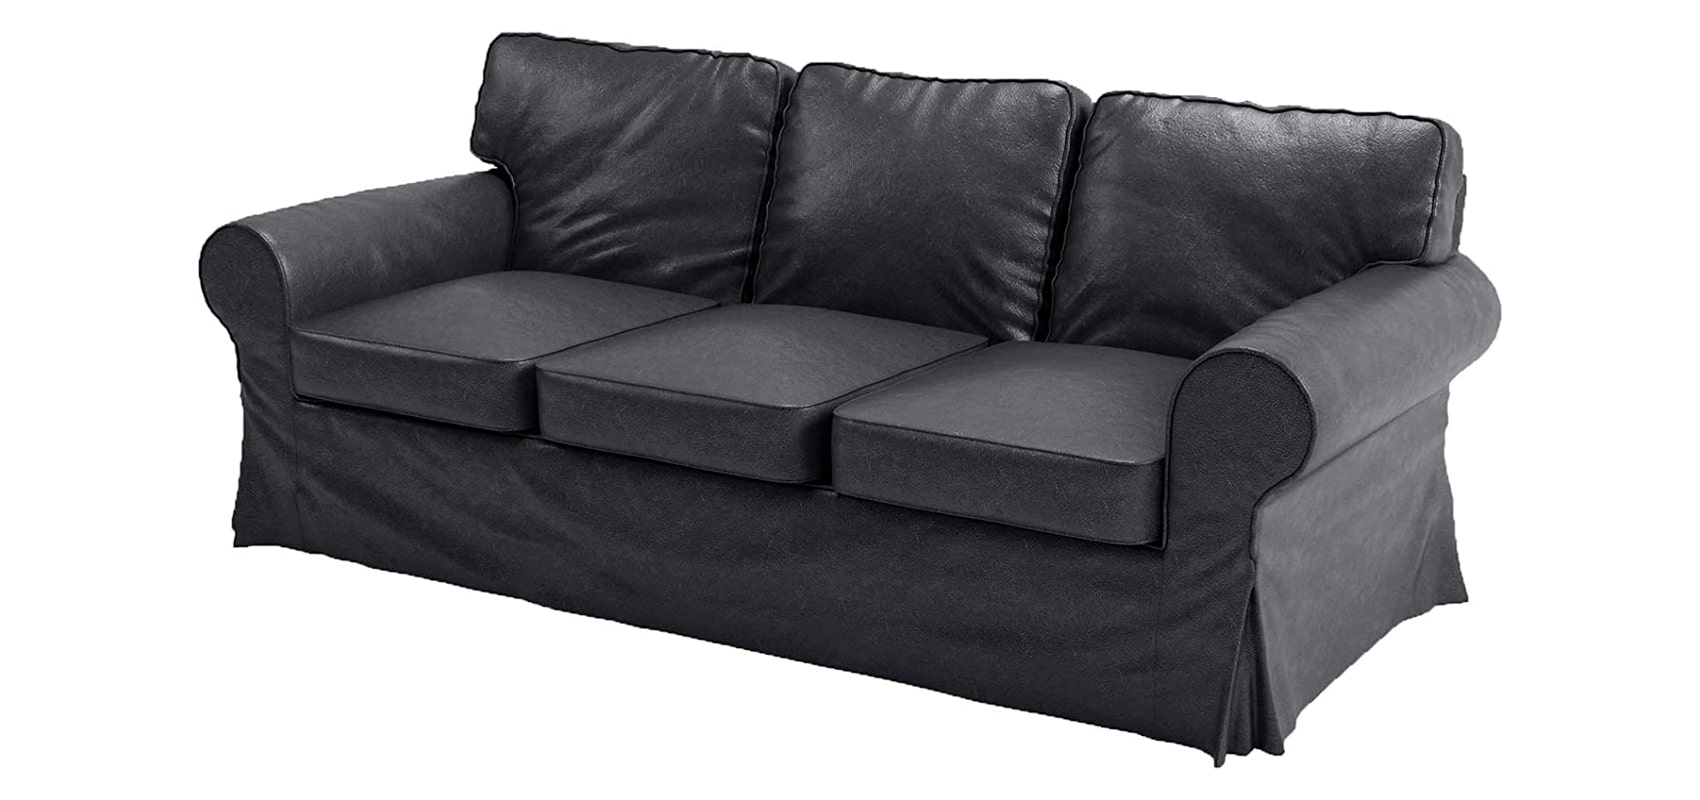 Black Couch Covers | Black Sofa Covers